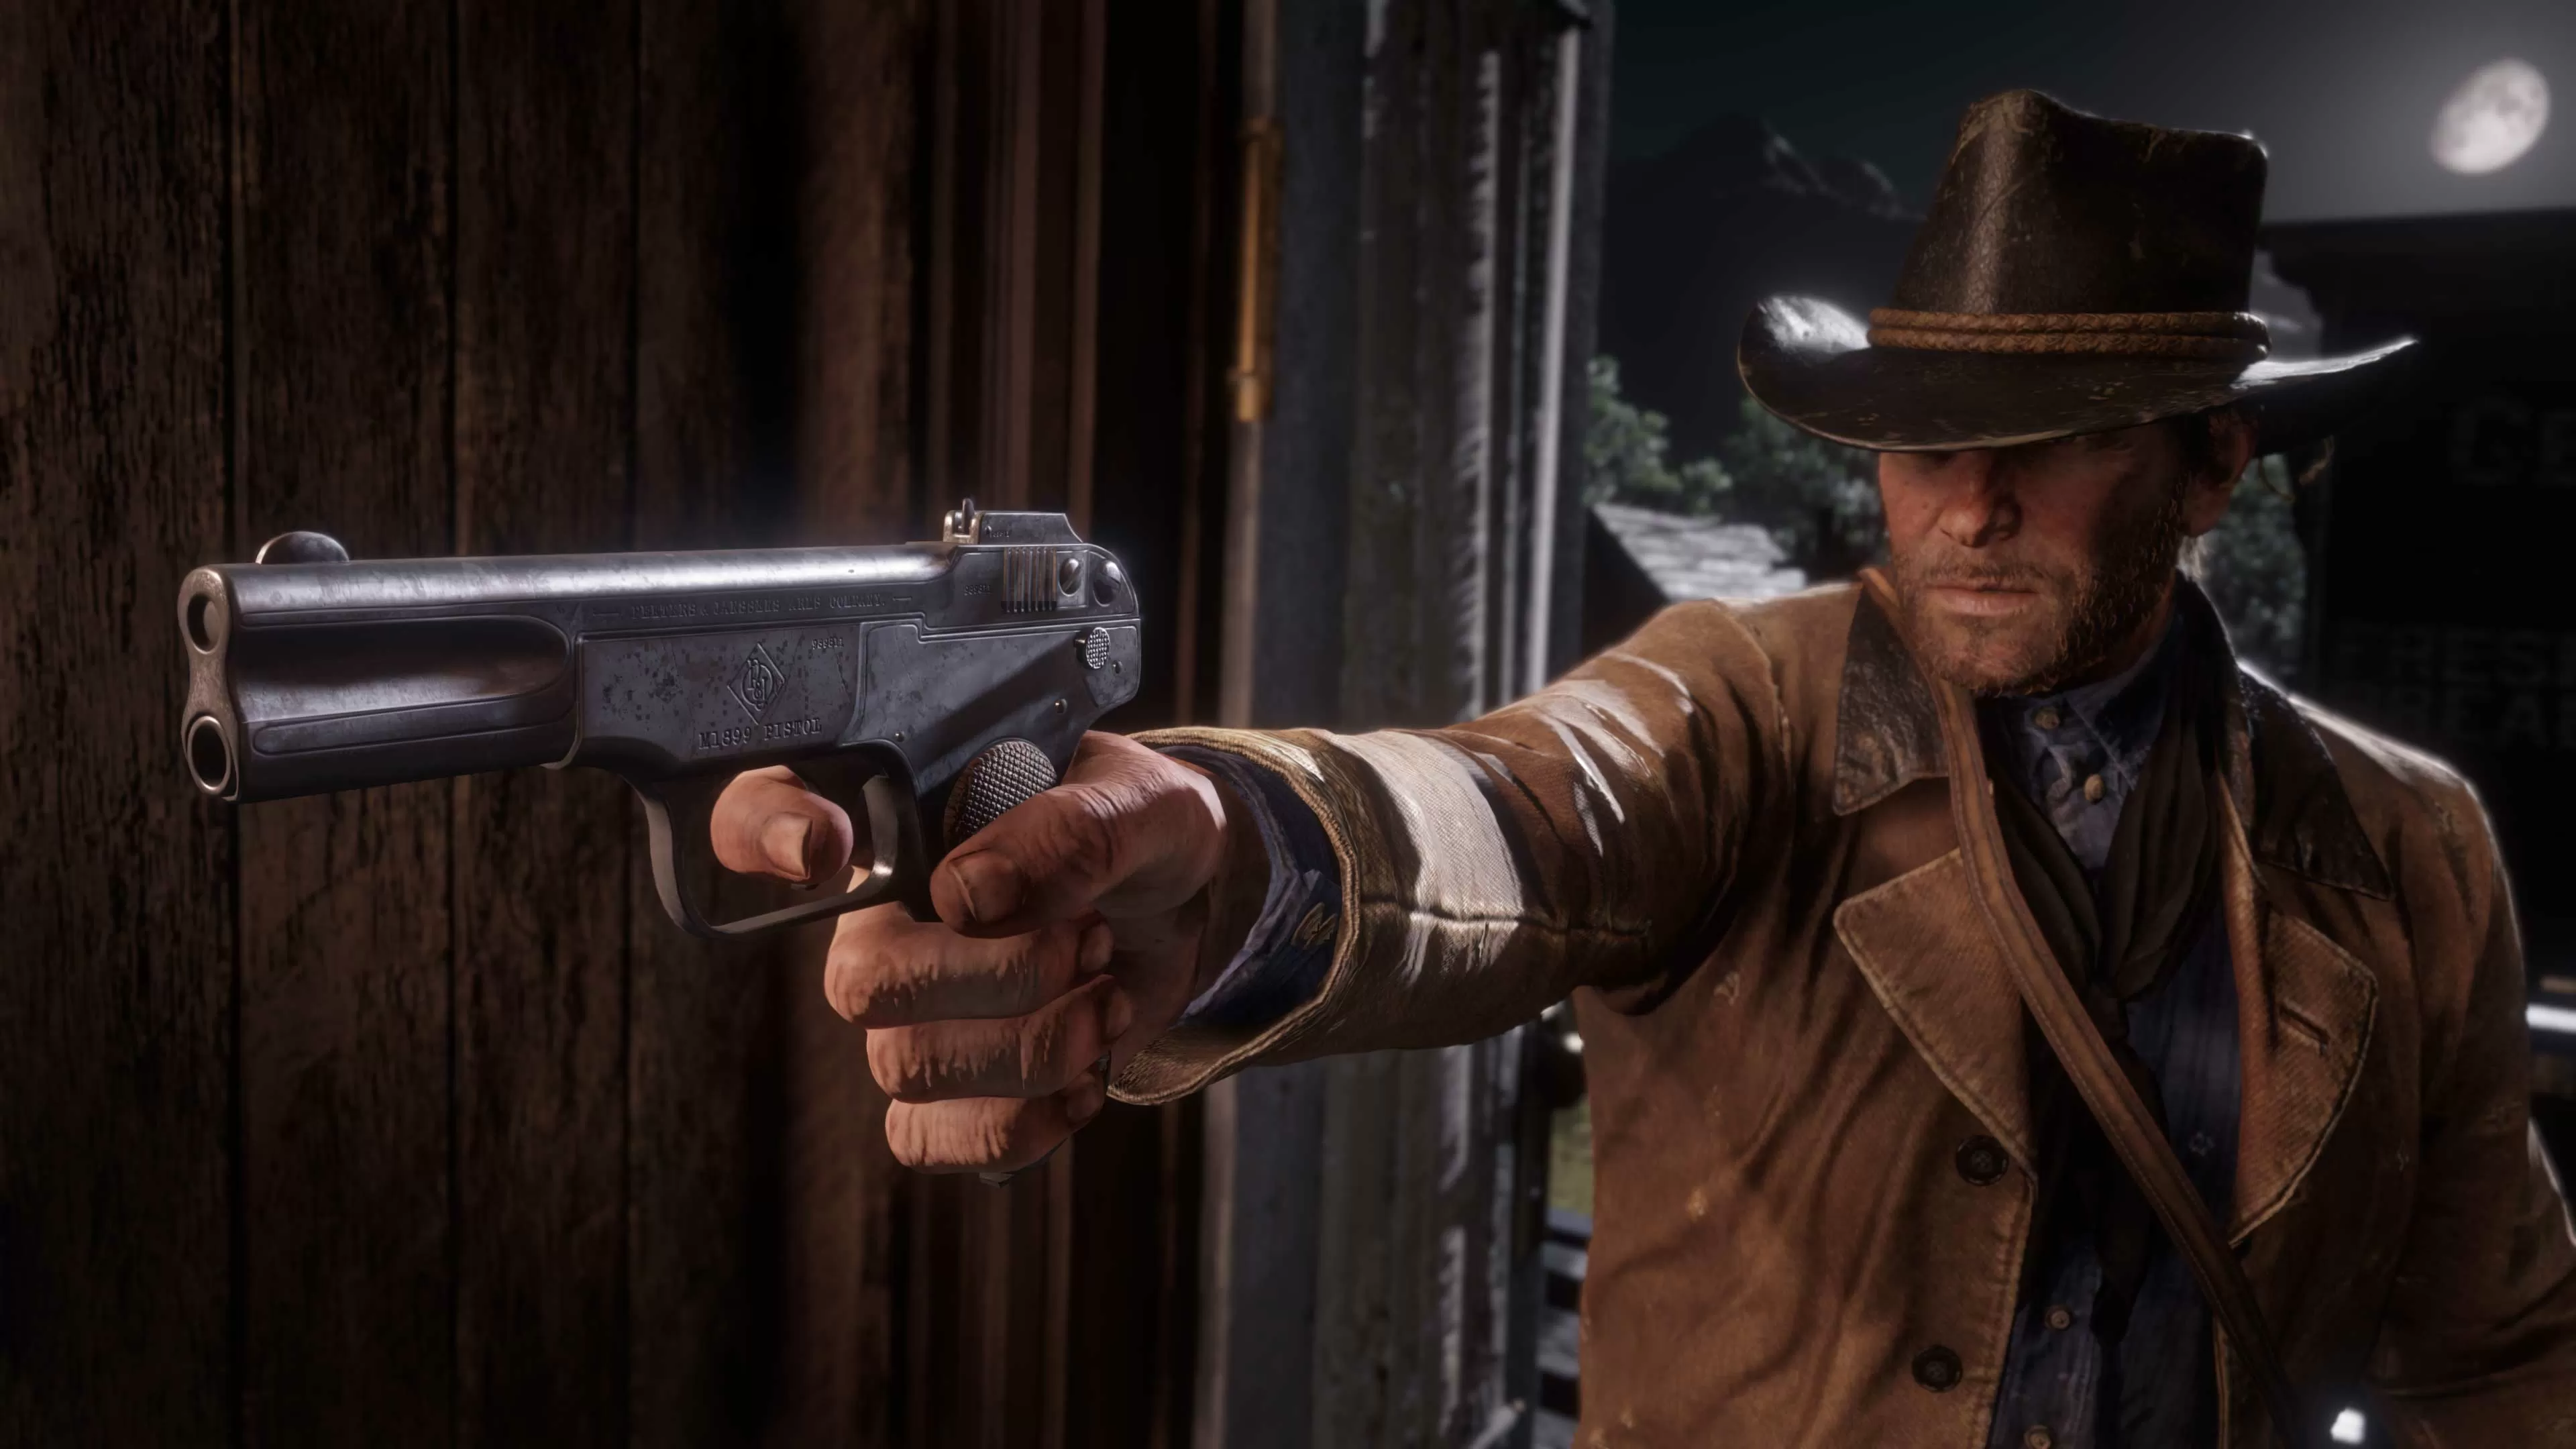 The Steam Awards: Red Dead Redemption 2 is 2020's game of the year